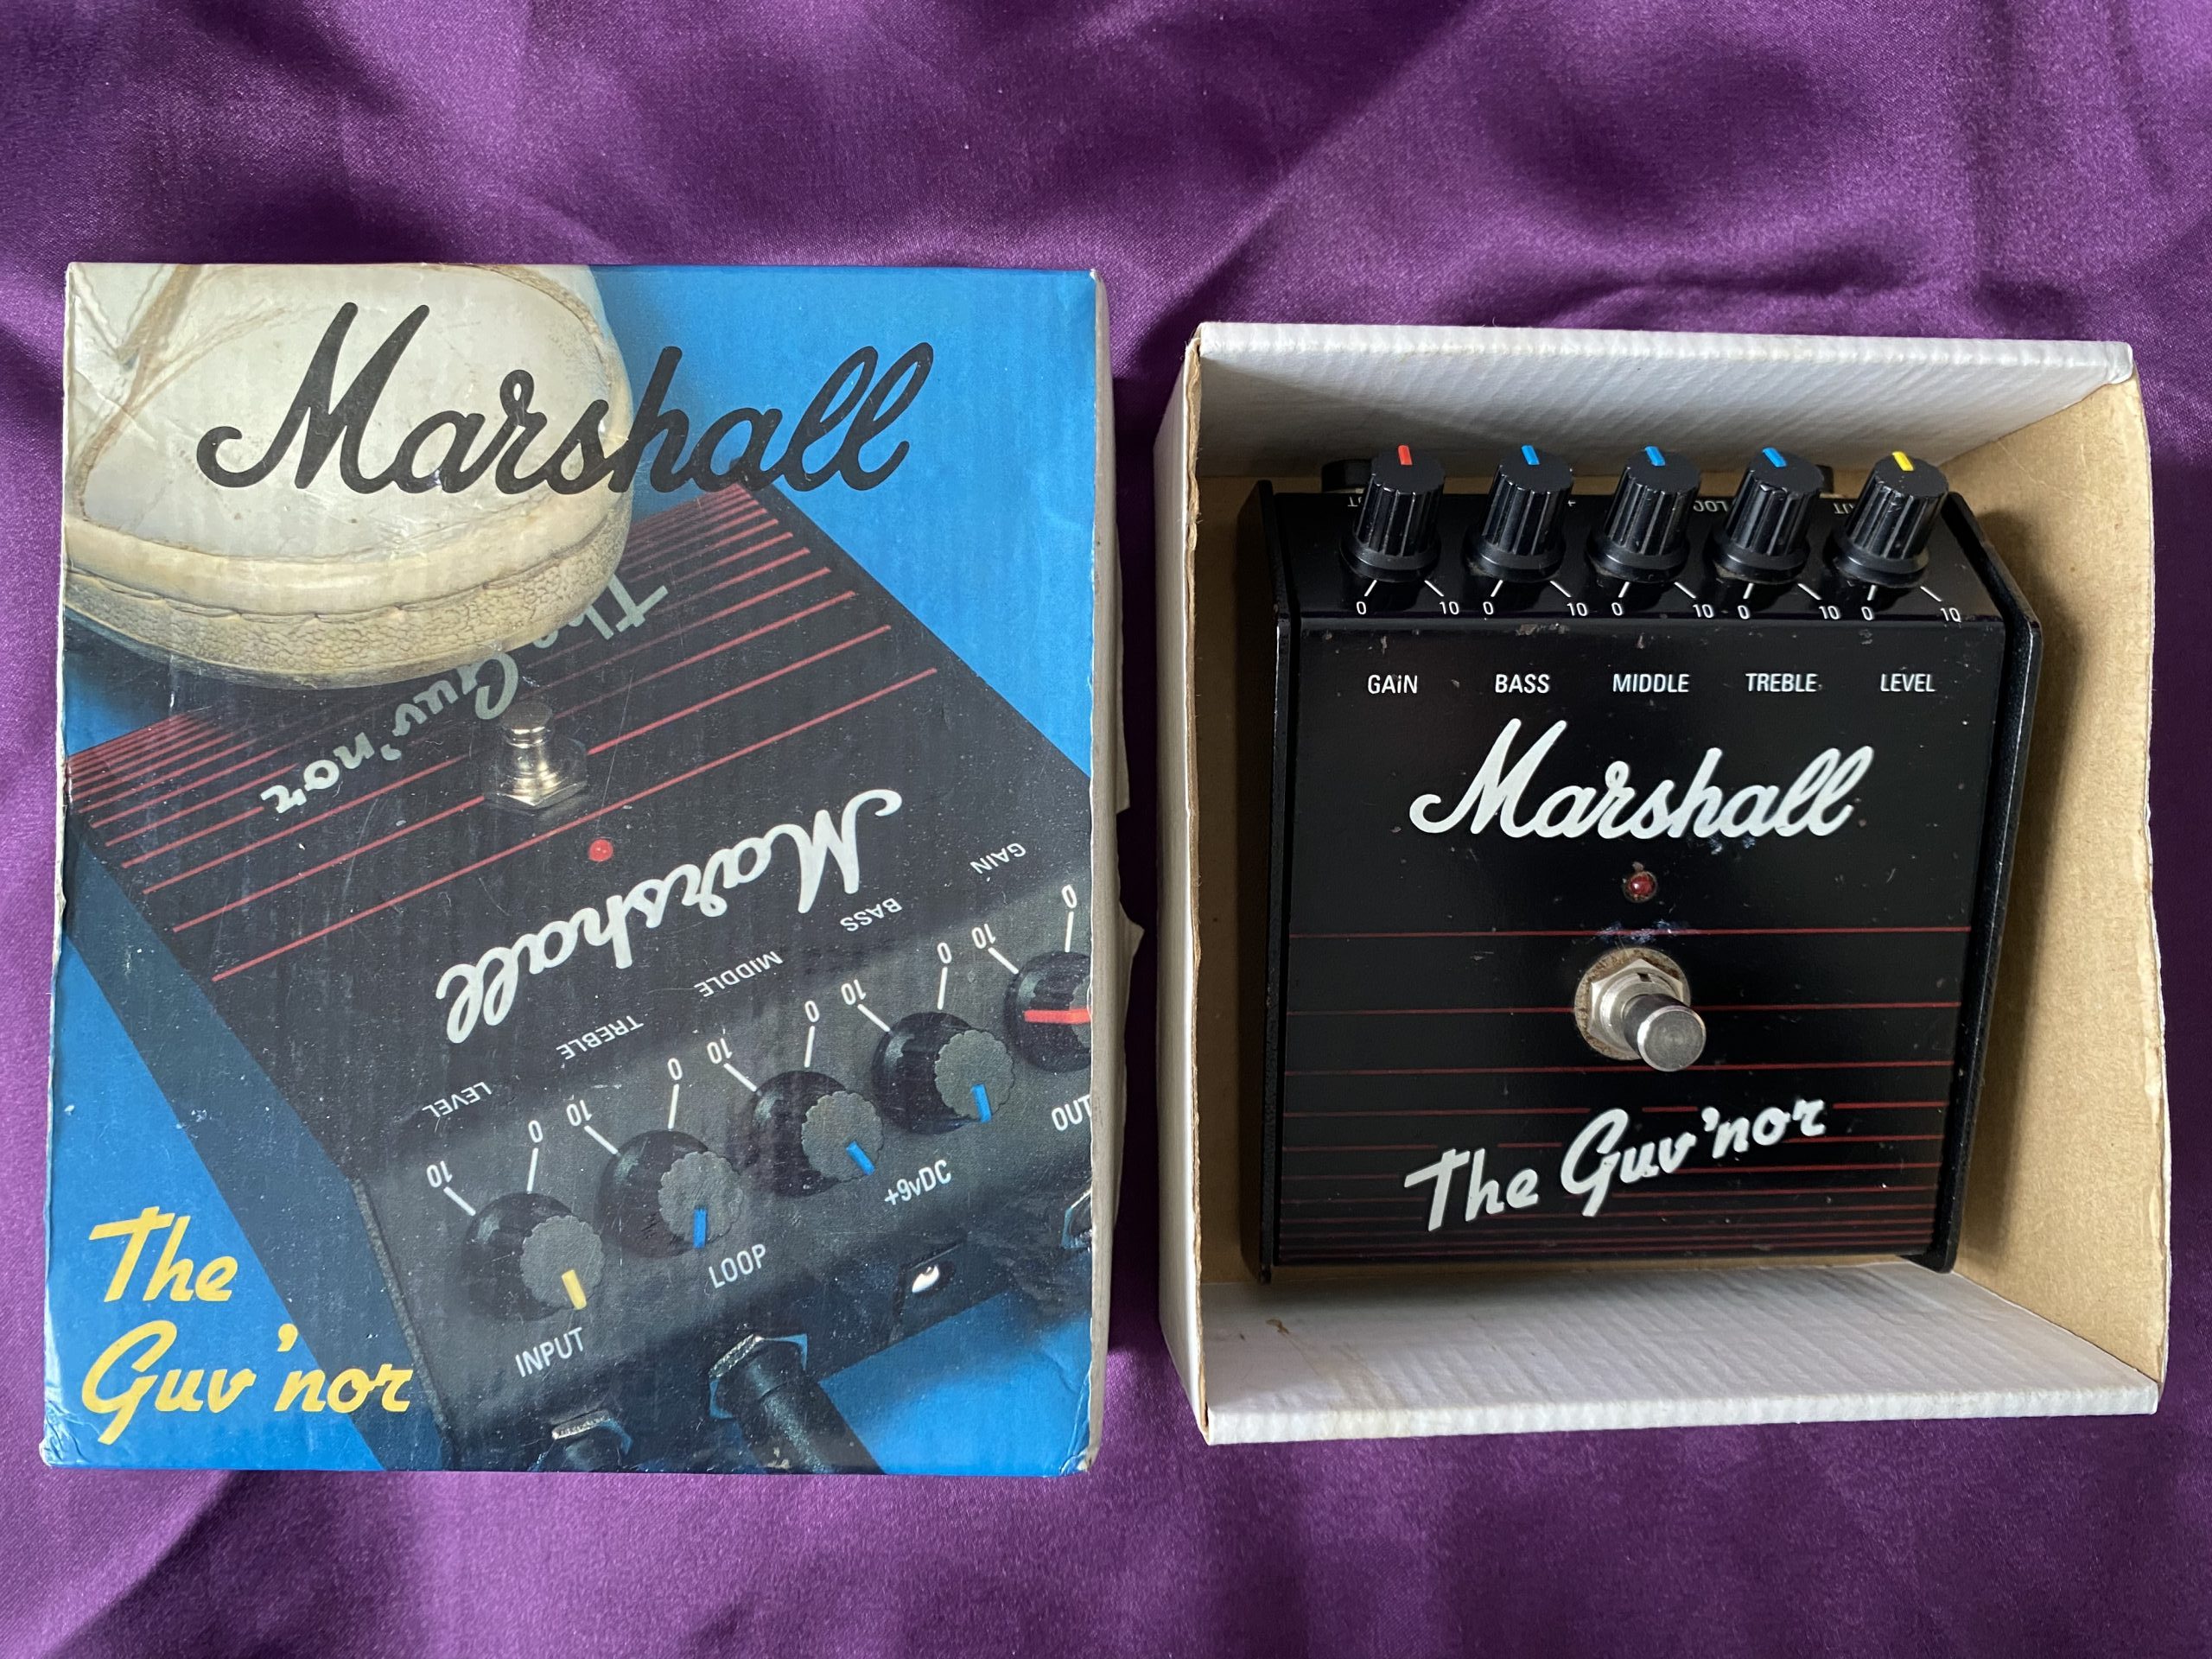 Feature – 1989 Marshall The Guv'nor